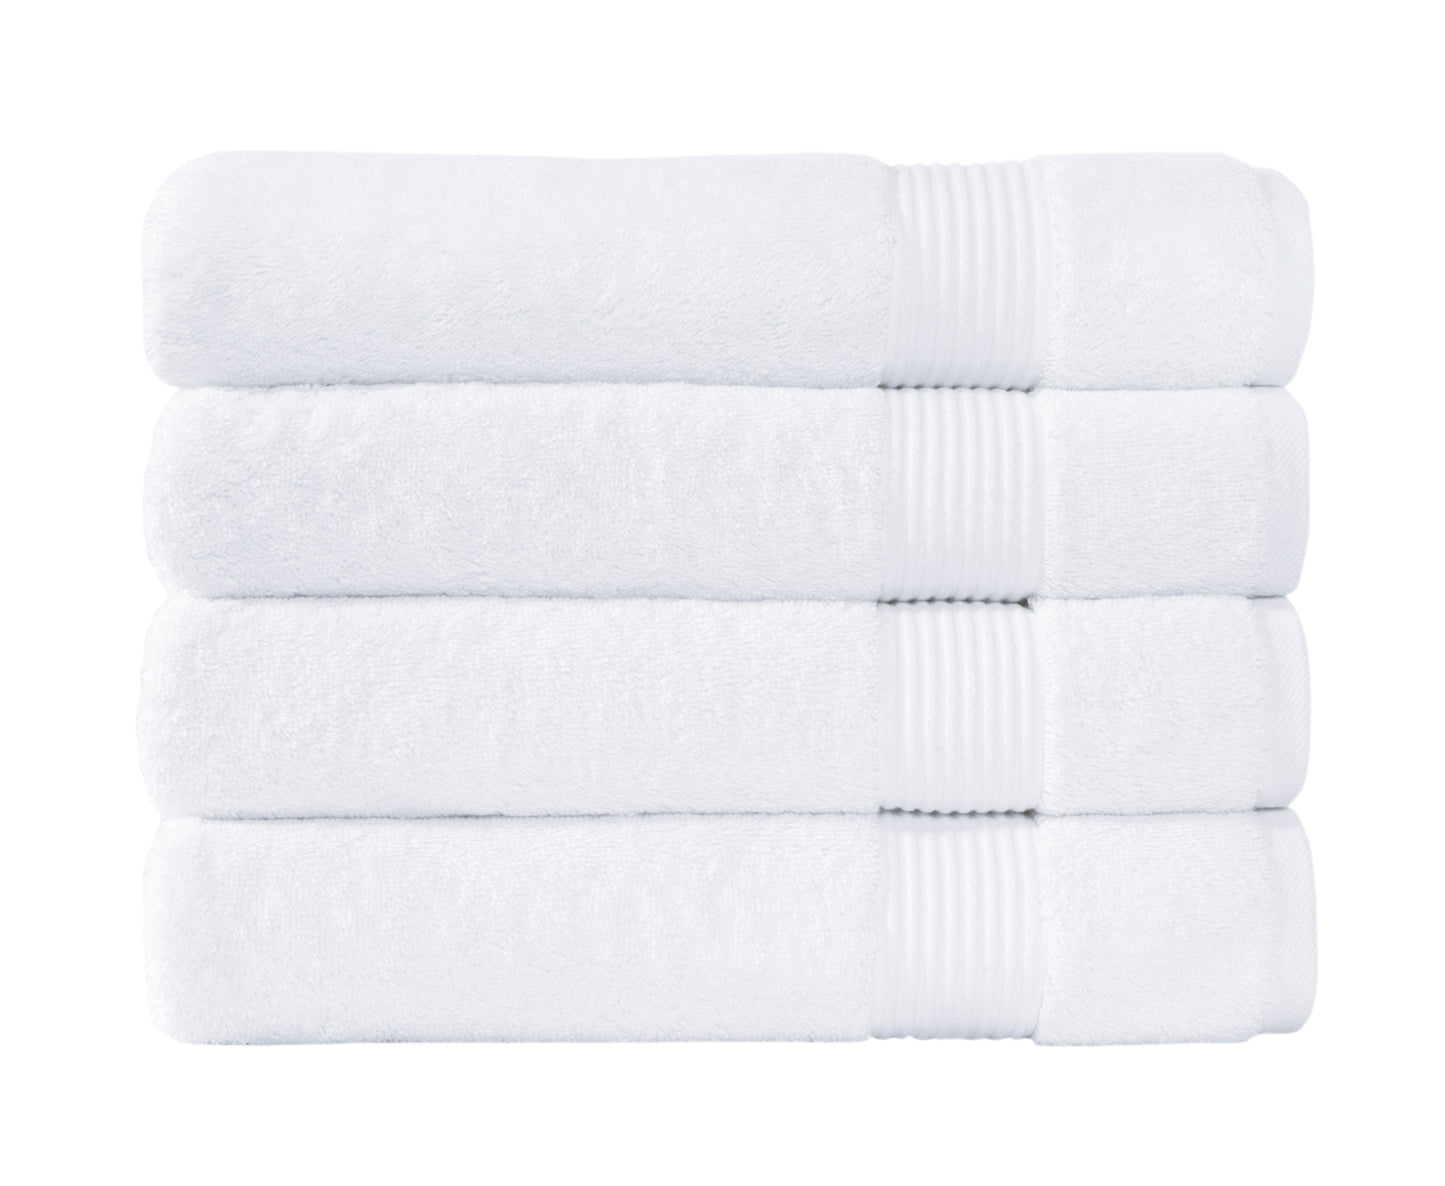 Amadeus Luxury Turkish Cotton Quick Drying Bath Towels - 4 Pieces - Classic Turkish Towels